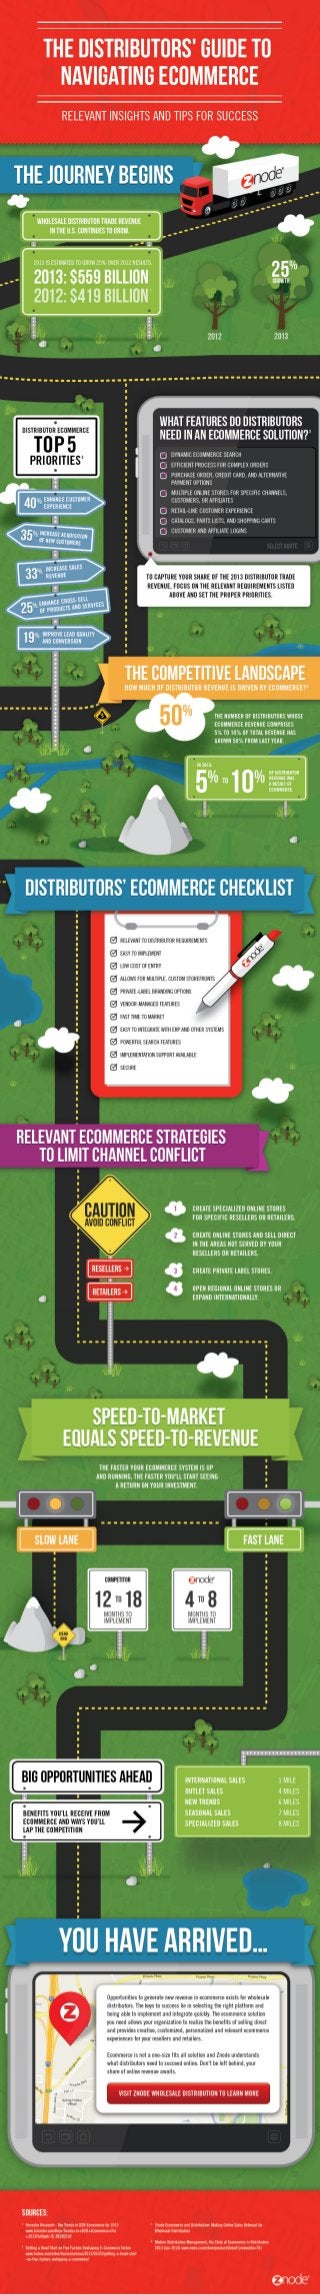 Infographic: The Distributors' Guide to Navigating Ecommerce